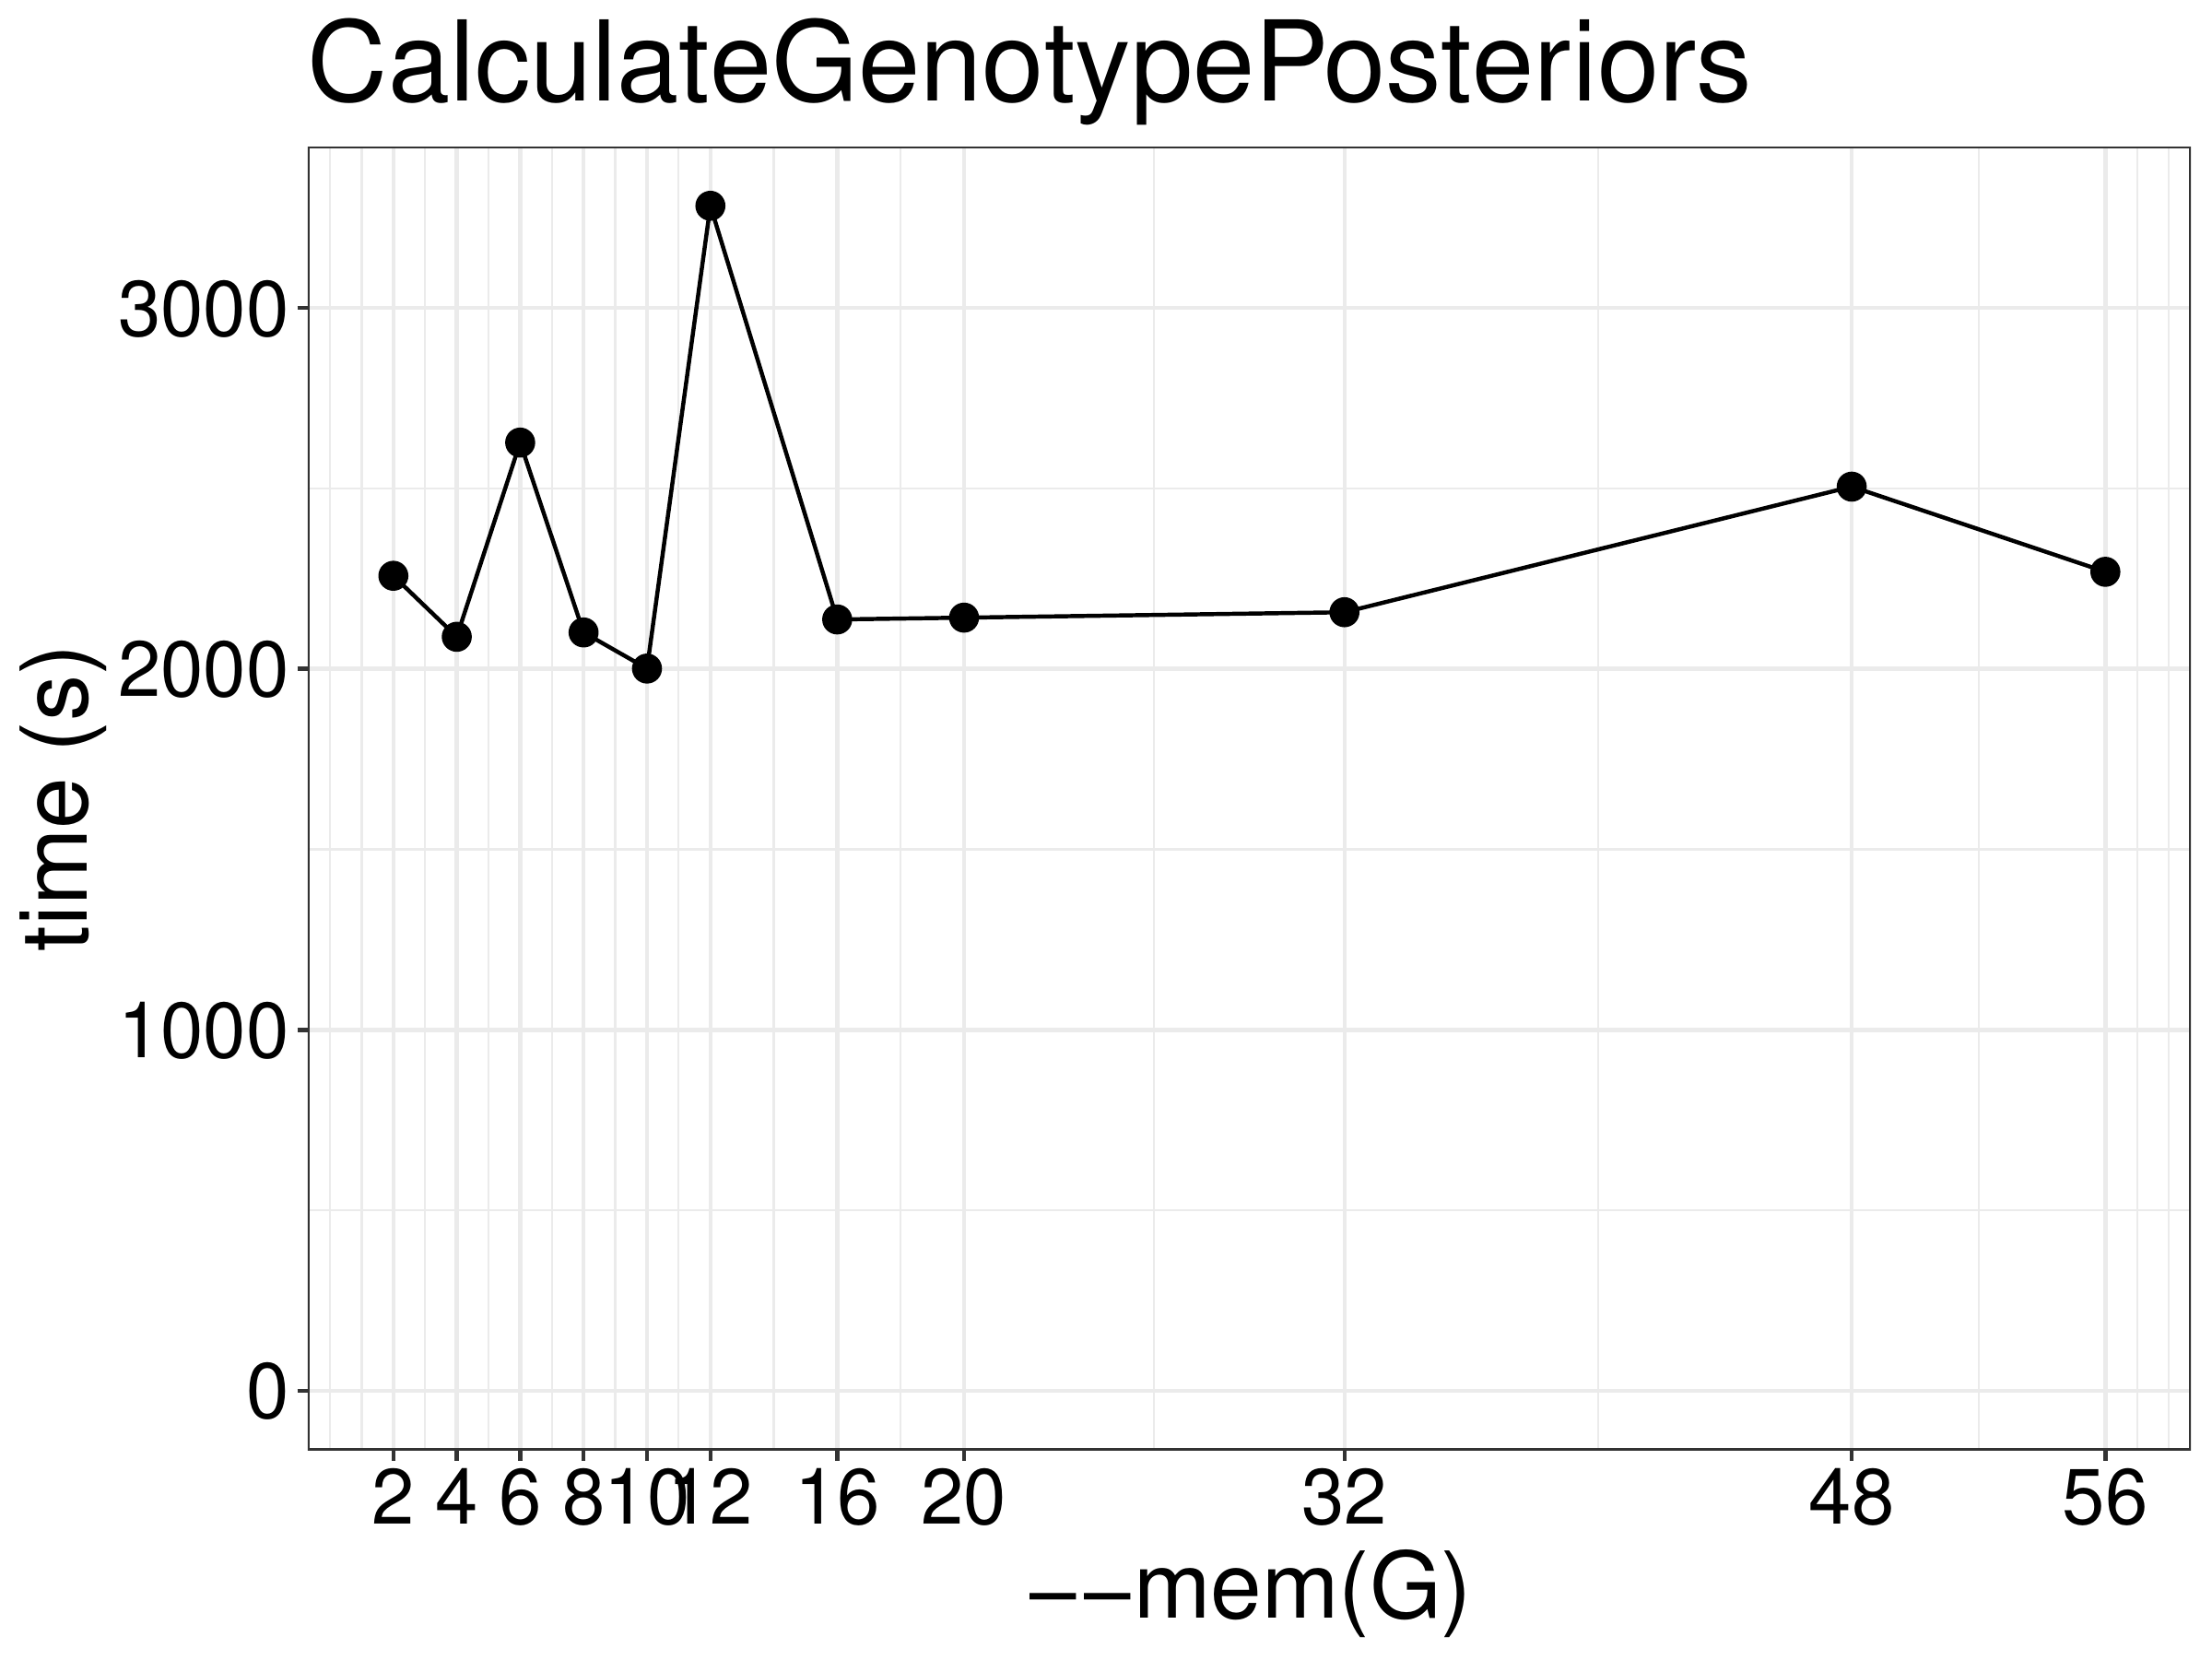 Runtime of CalculateGenotypePosteriors as a function of the number of threads